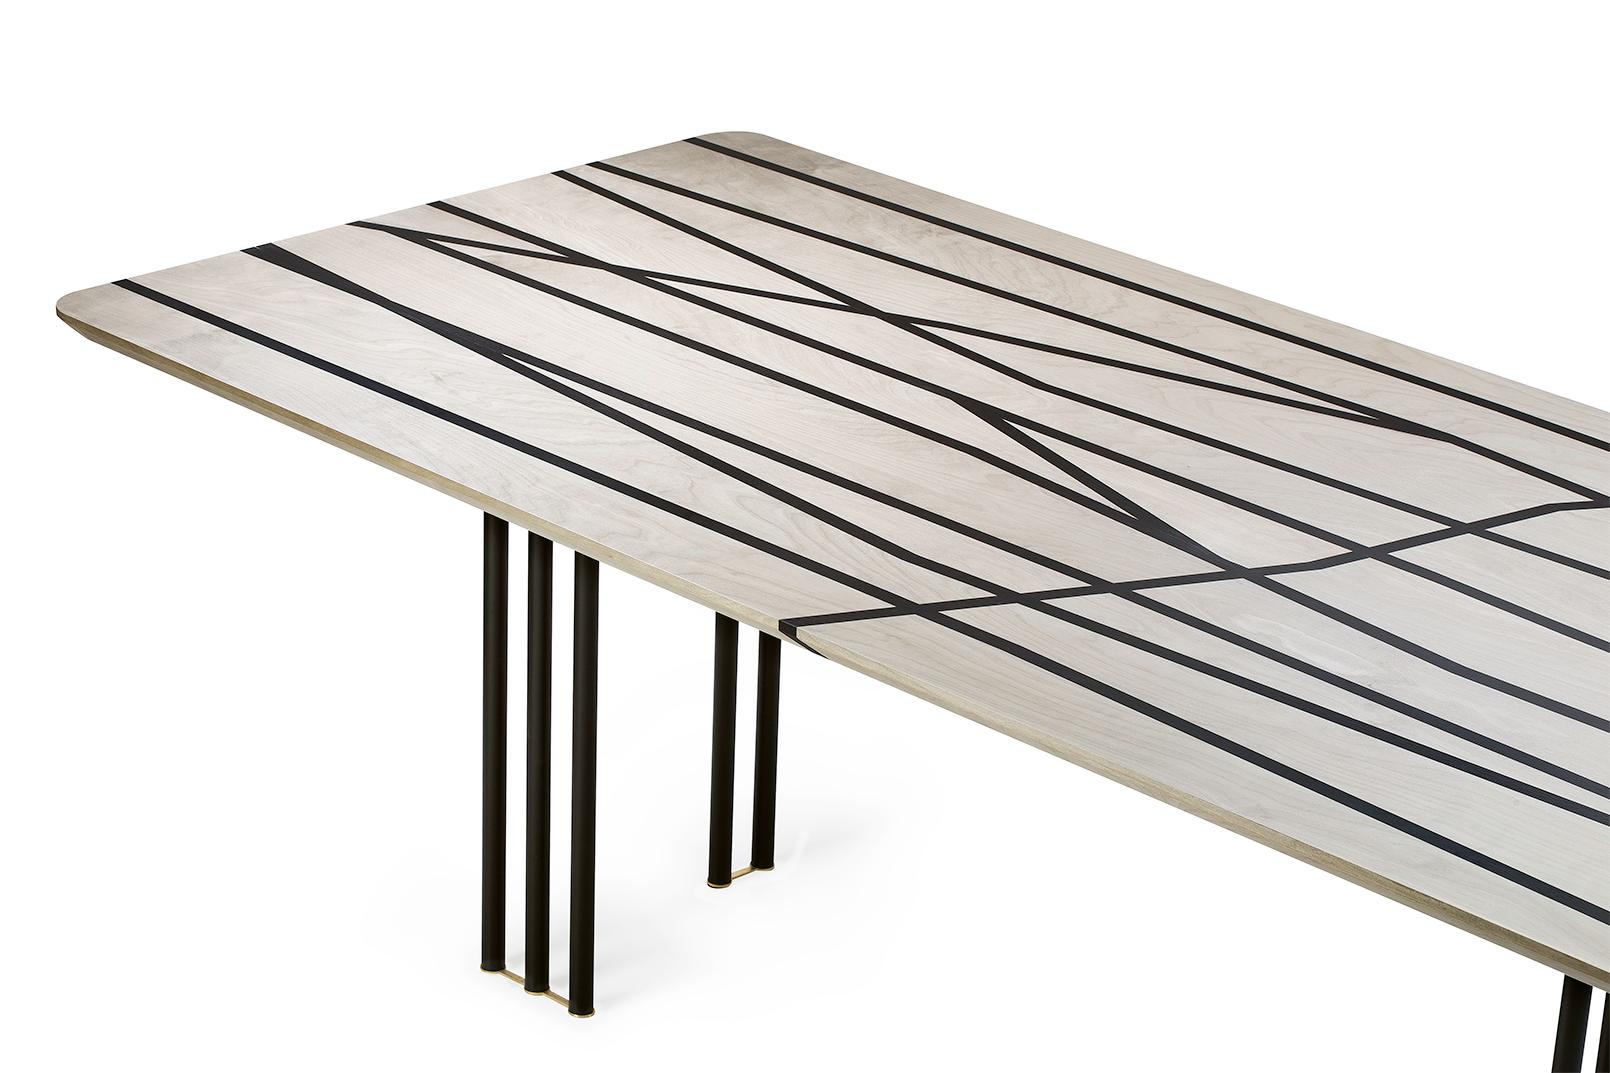 Inlay 21st Century Foresta Inlaid Table in Birch, Black Ash, Metal Legs, Made in Italy For Sale